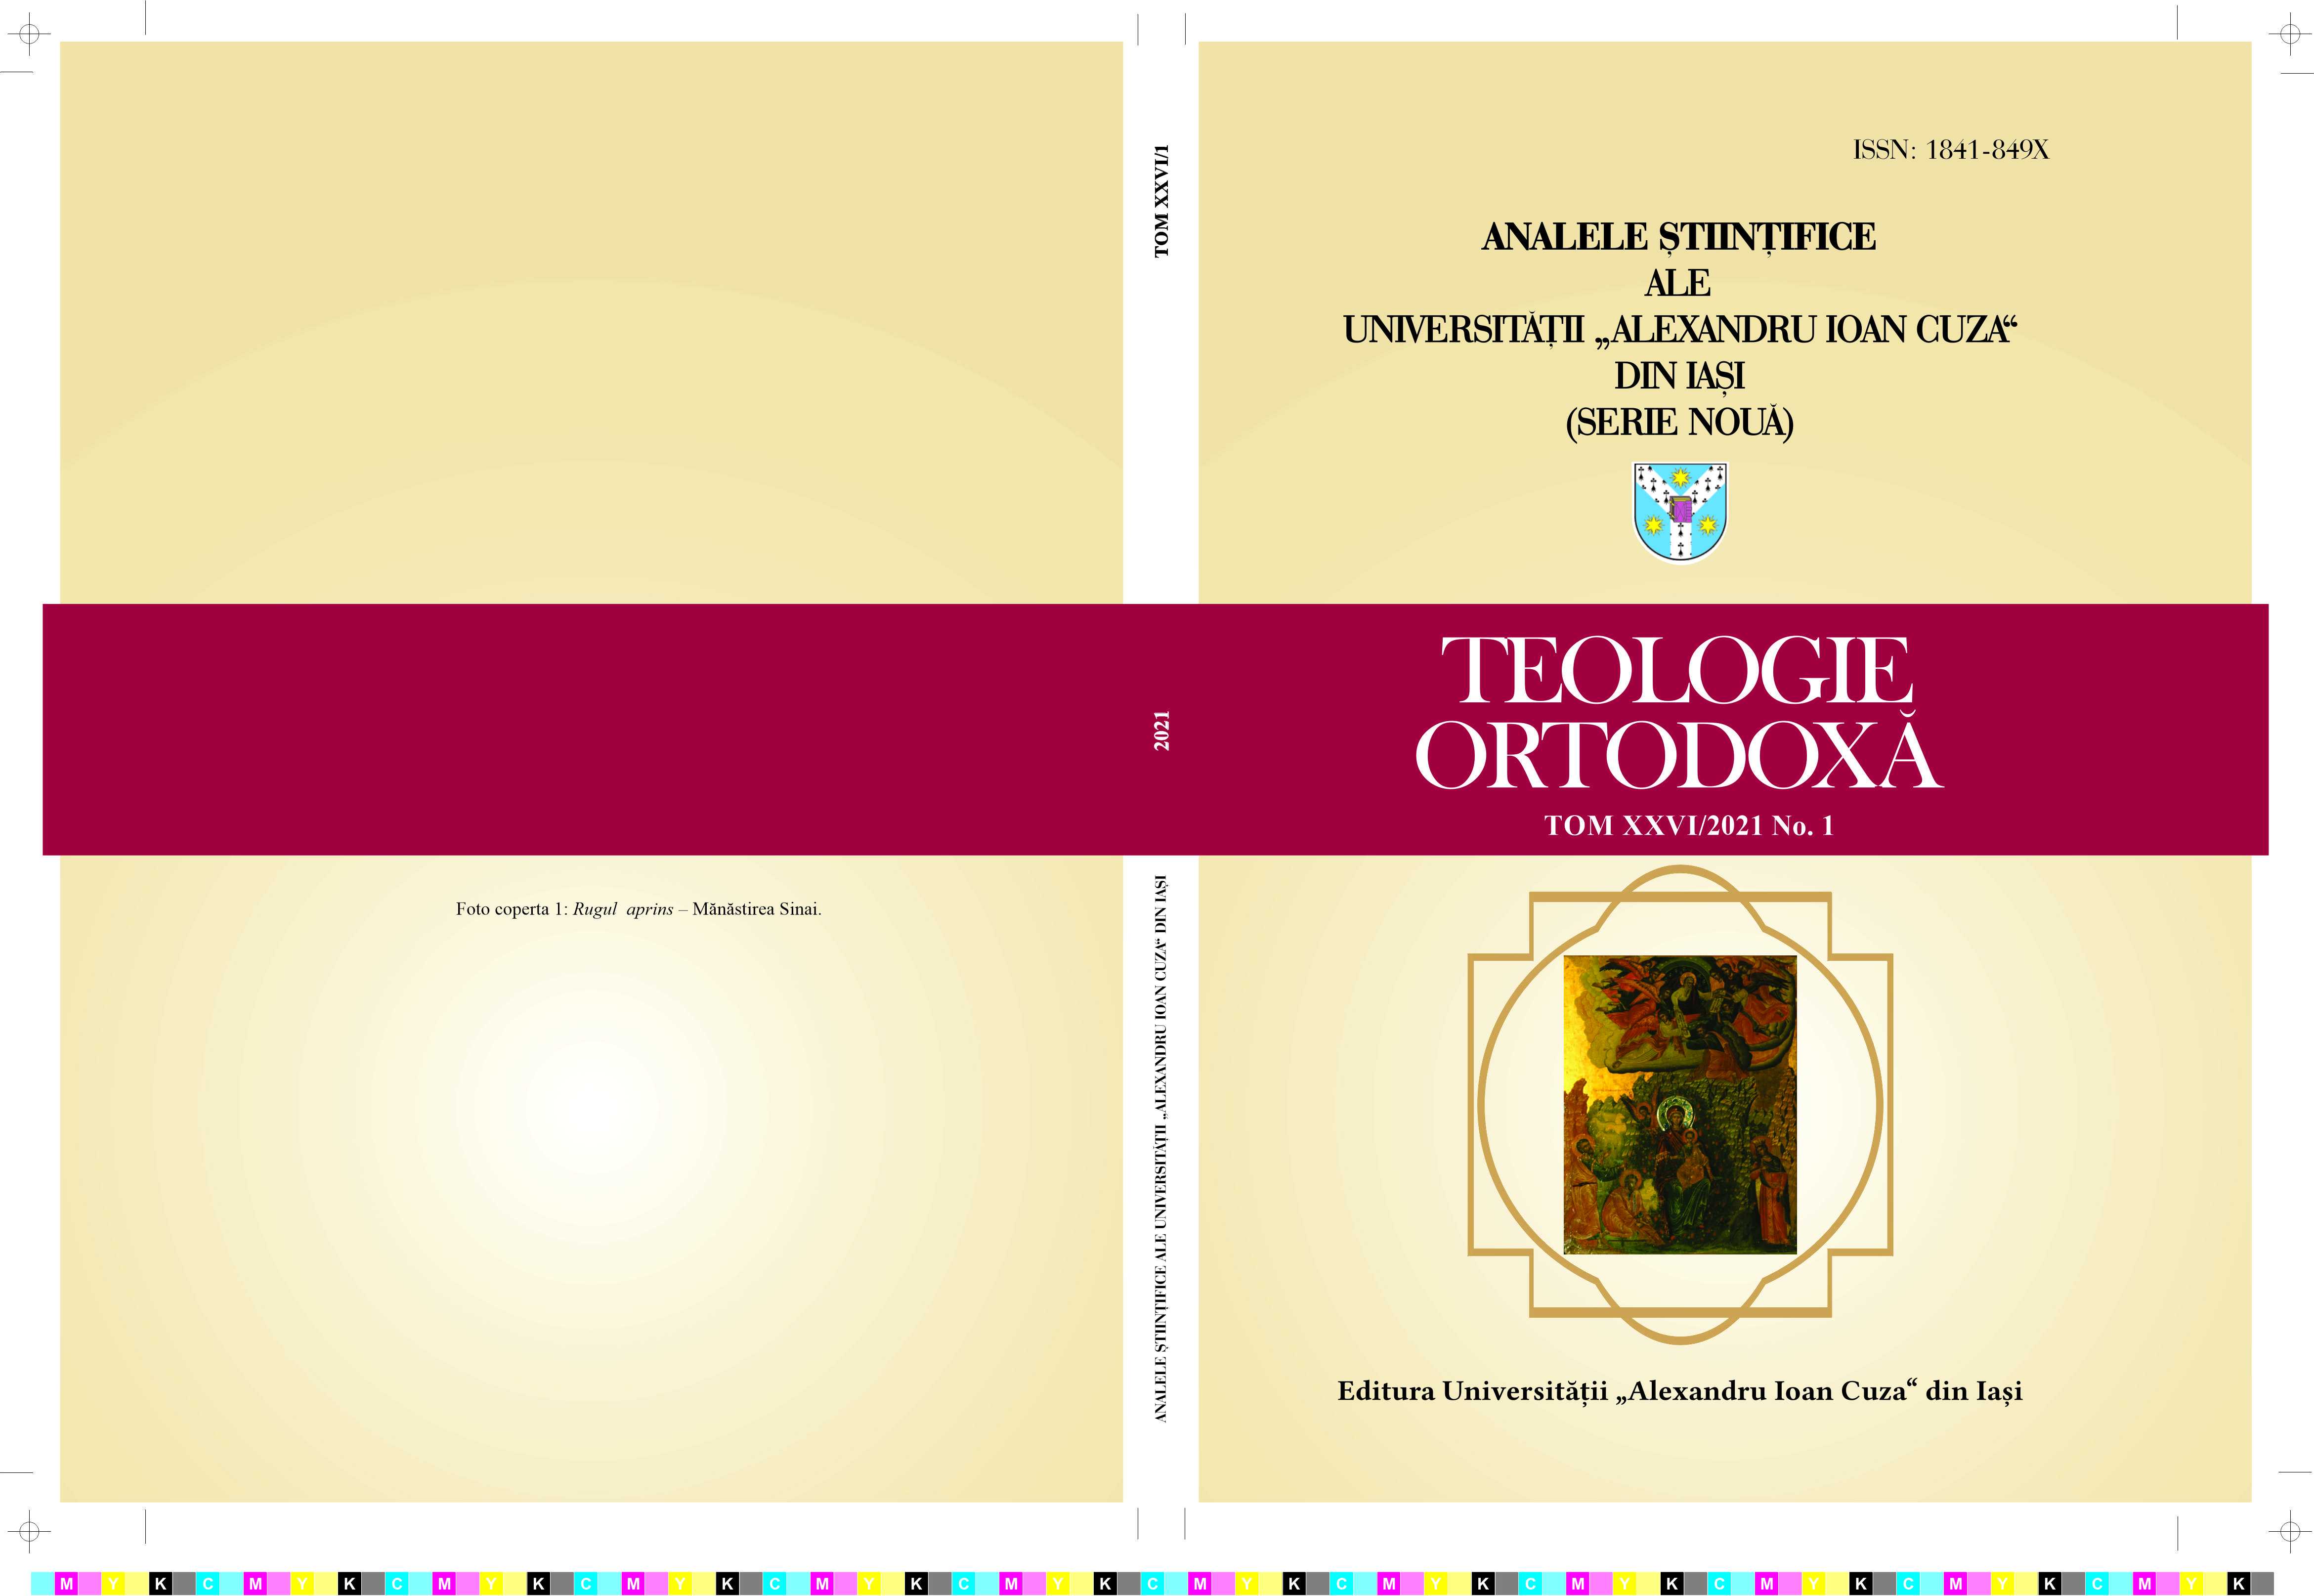 Studies and articles of biblical theology of the Old
Testament in the review “Altarul / Mitropolia Banatului”
[“The Shrine of Banat” / “The Metropolitan see of Banat”] (1944-1947; 1951-2020) Cover Image